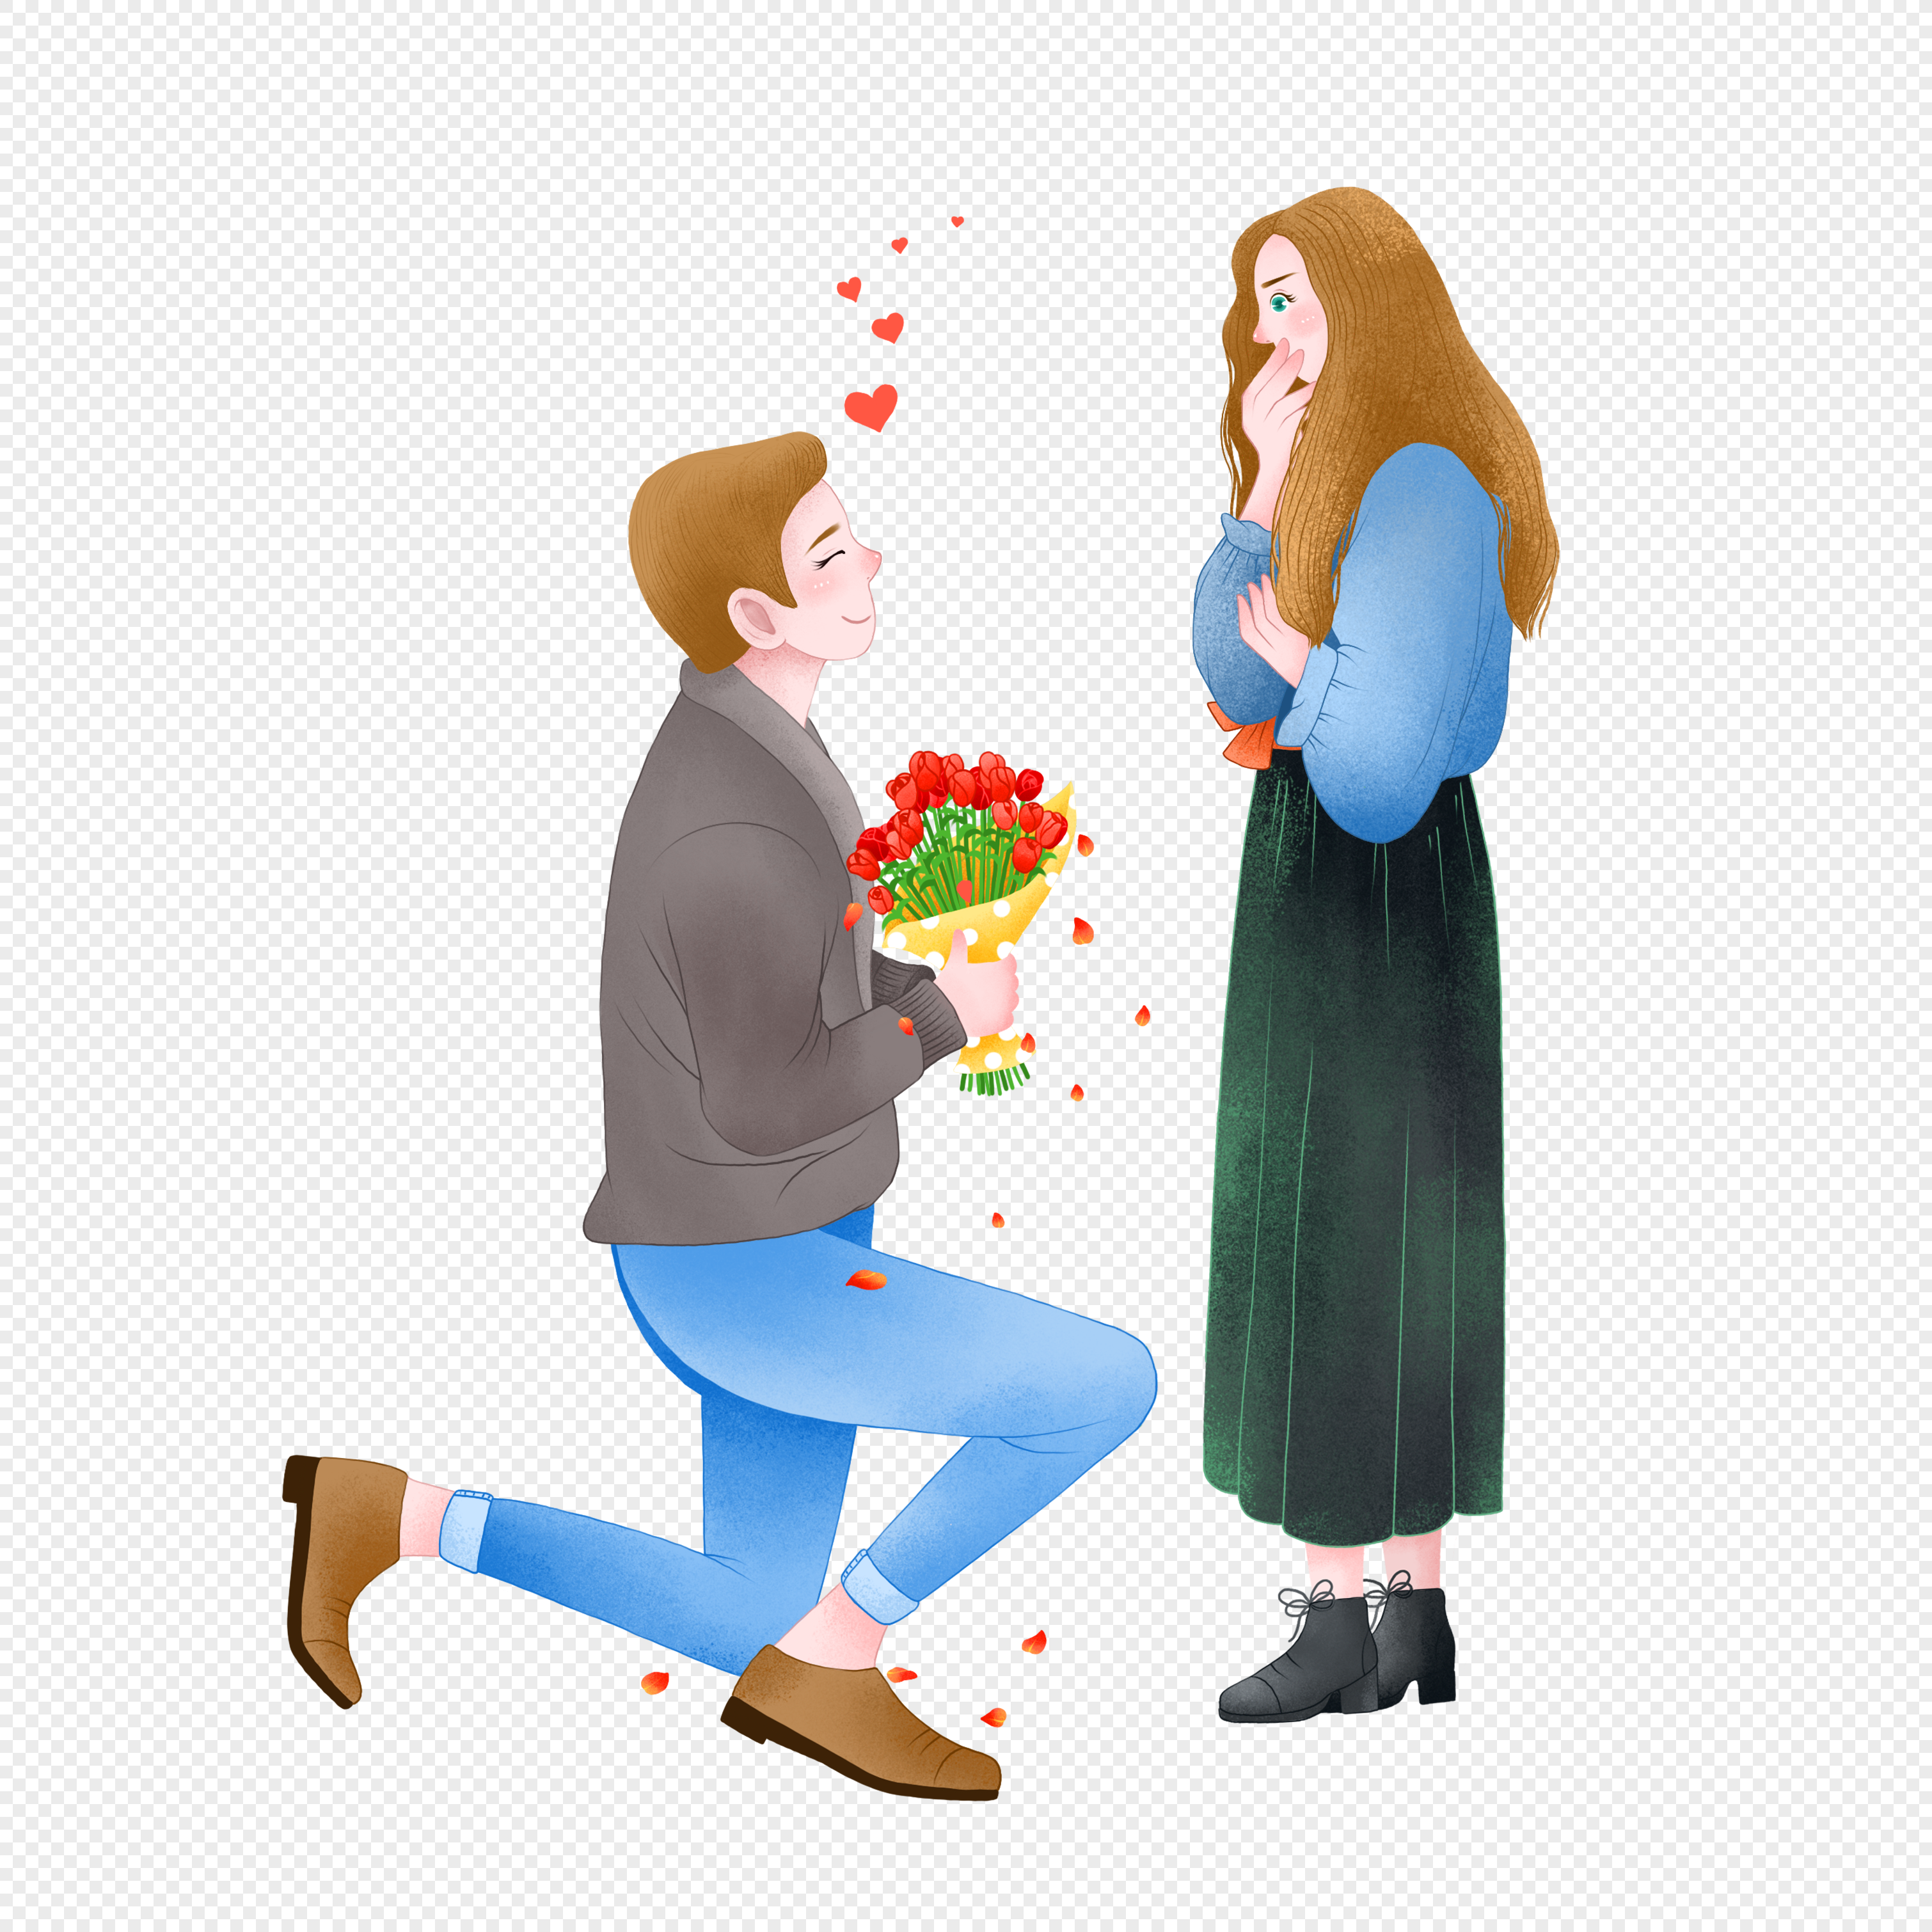 Boys Love Proposal Images, HD Pictures For Free Vectors Download -  